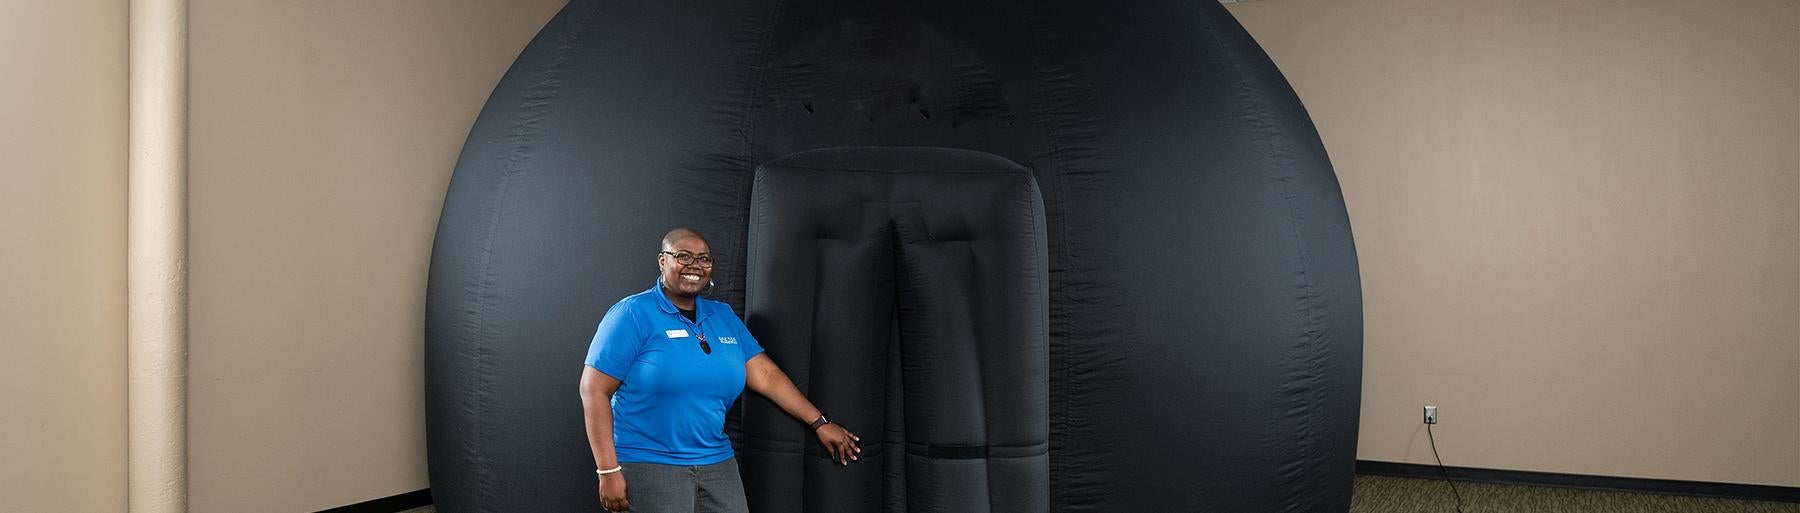 Woman in blue shirt stands in front of entrance to large black inflatable dome